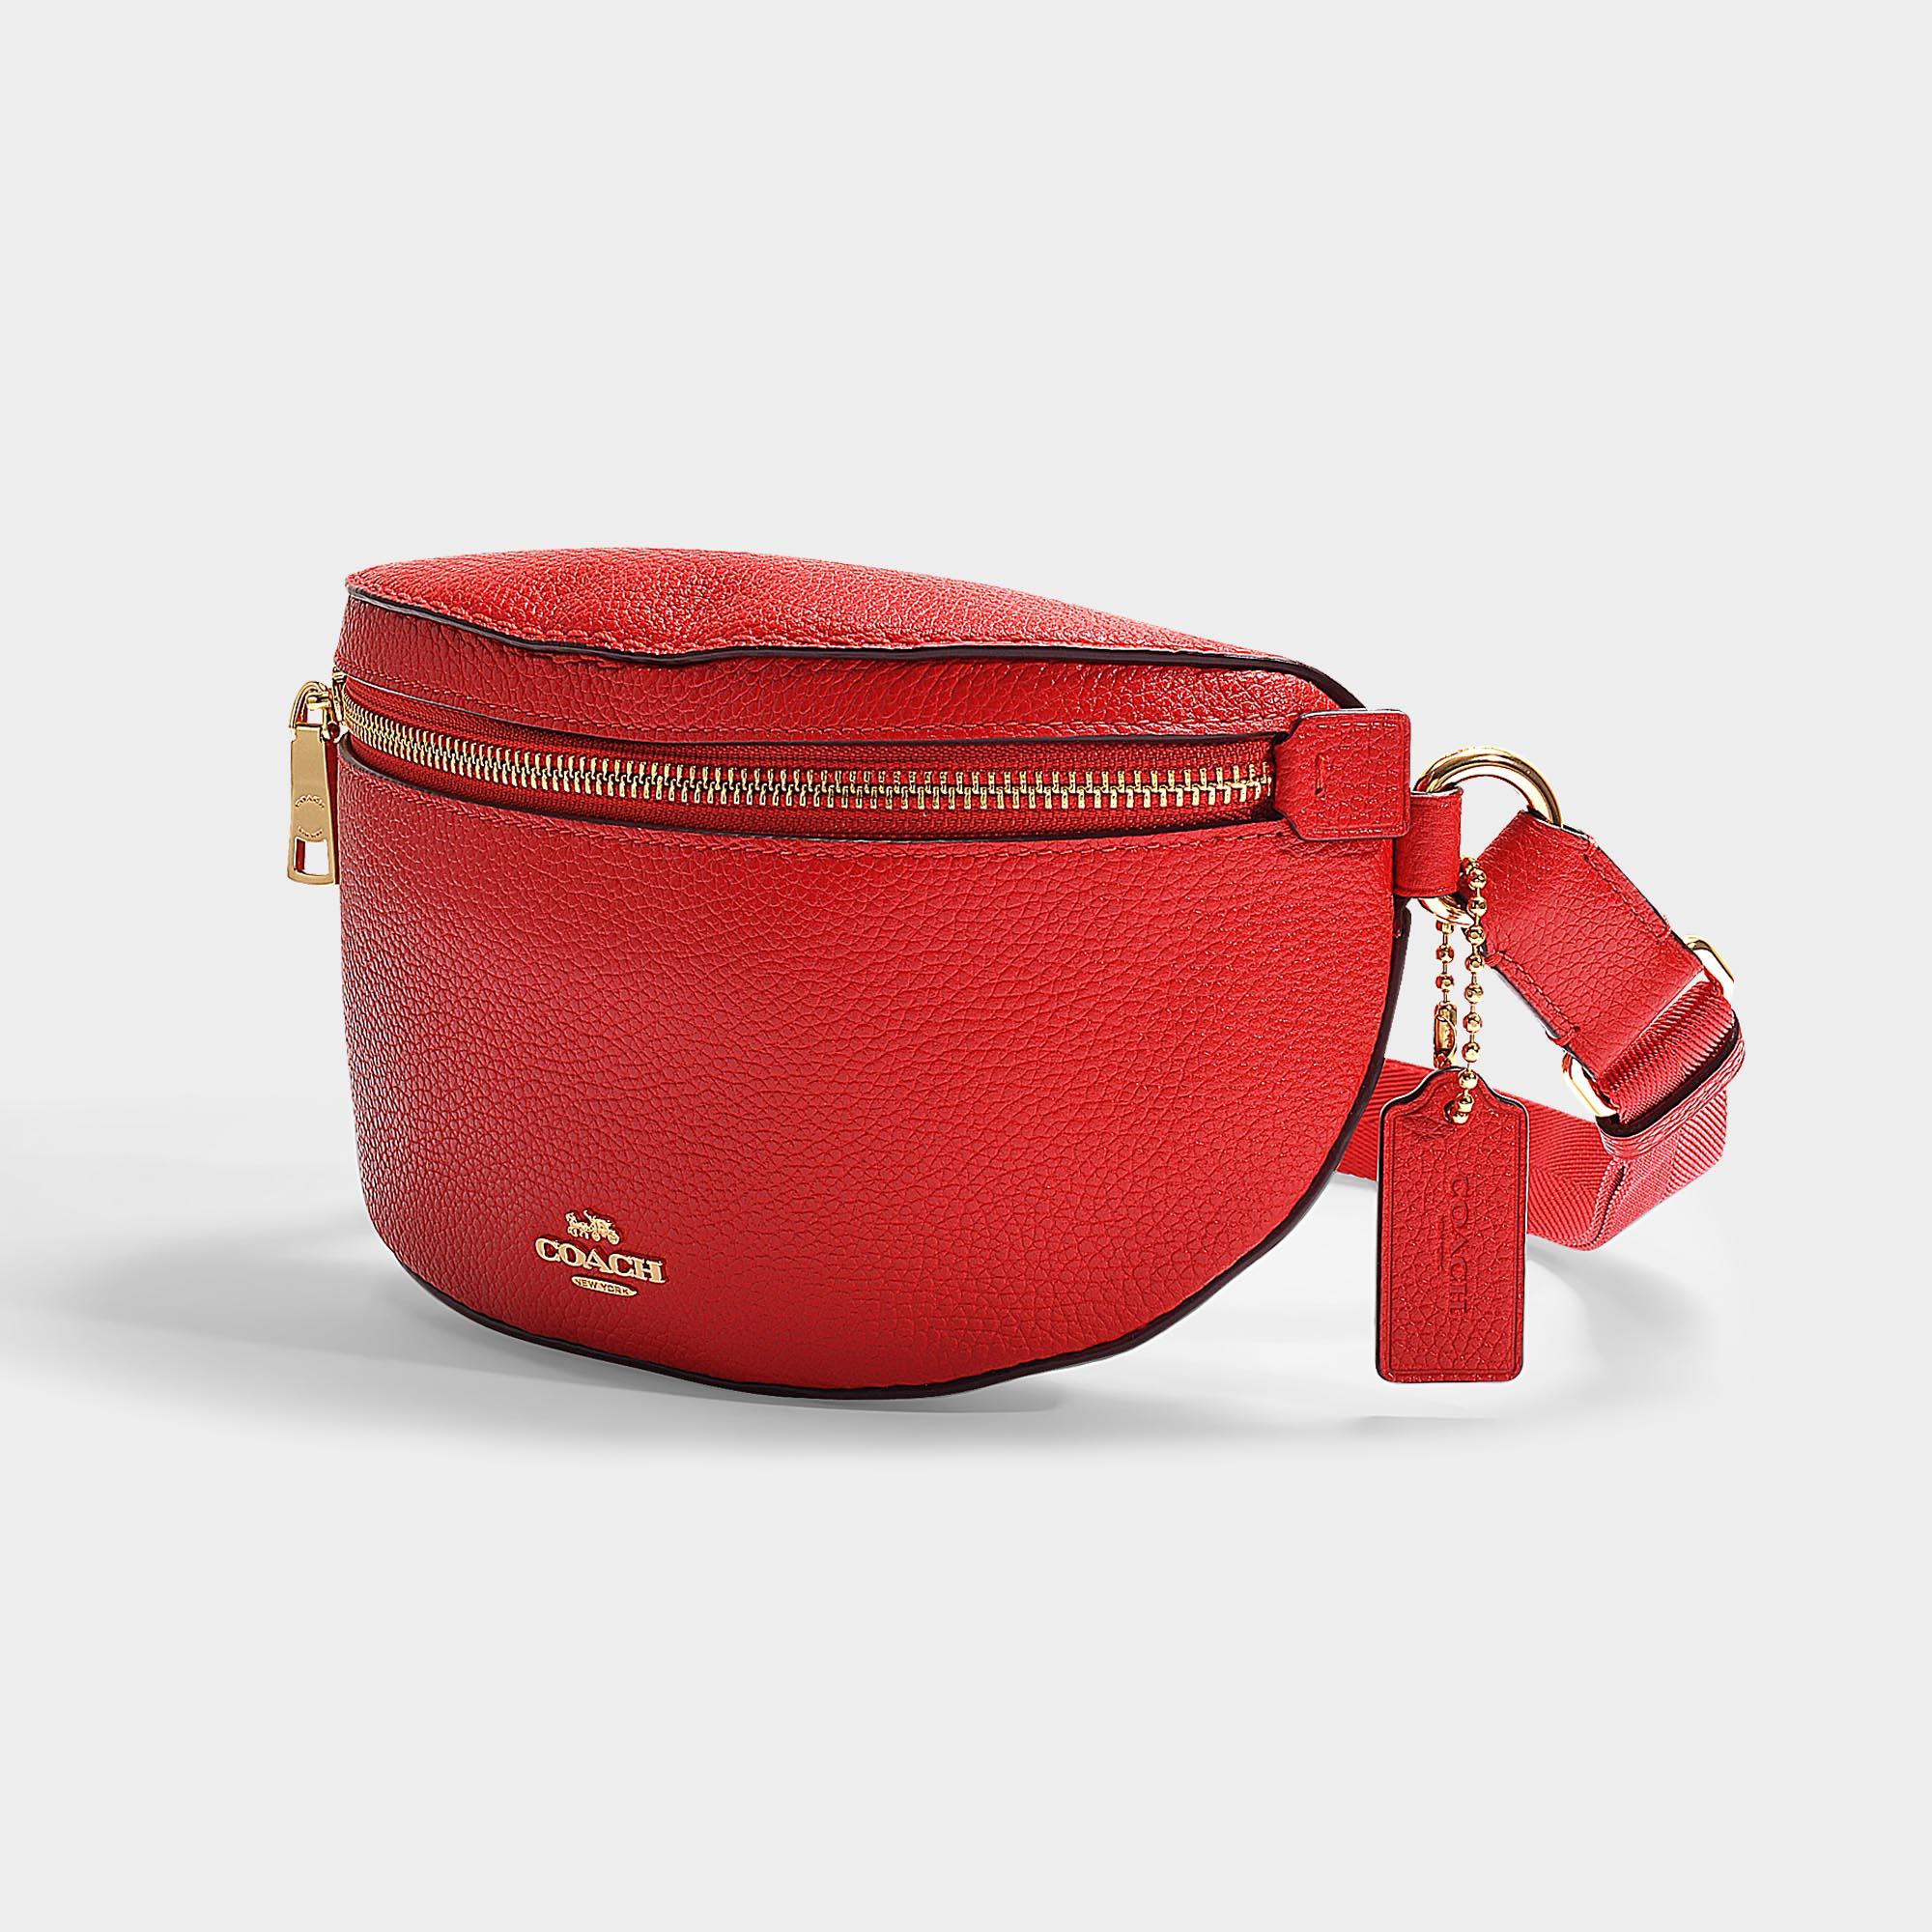 COACH Belt Bag In Jasper Polished Pebble Leather in Red - Lyst